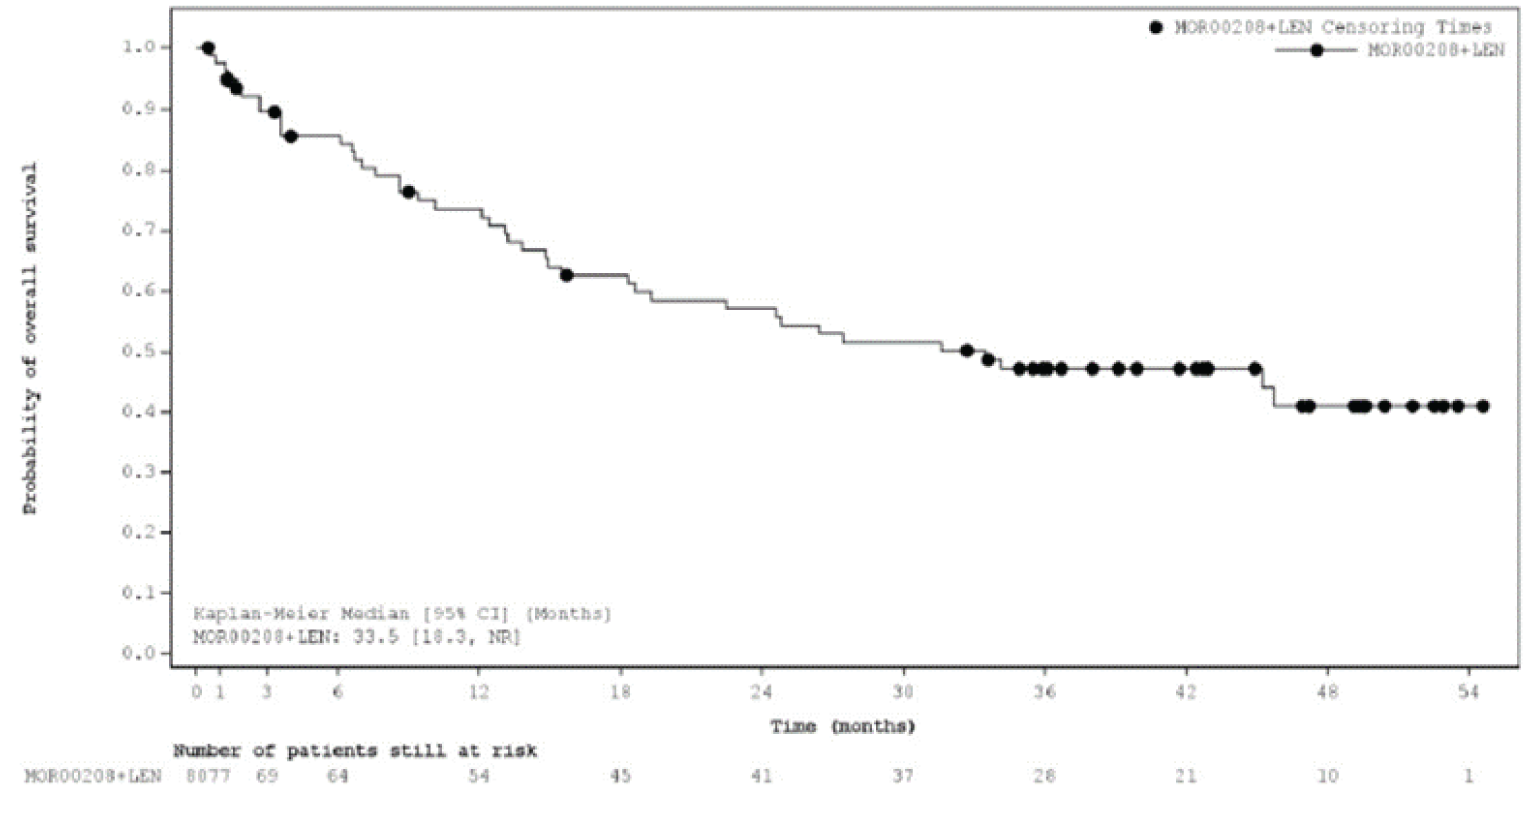 Kaplan–Meier curve of OS from month 0, with 80 patients still at risk, until month 54, with 1 patient still at risk. The curve decreases until it plateaus from approximately month 34 to month 45, decreases, and then plateaus again.